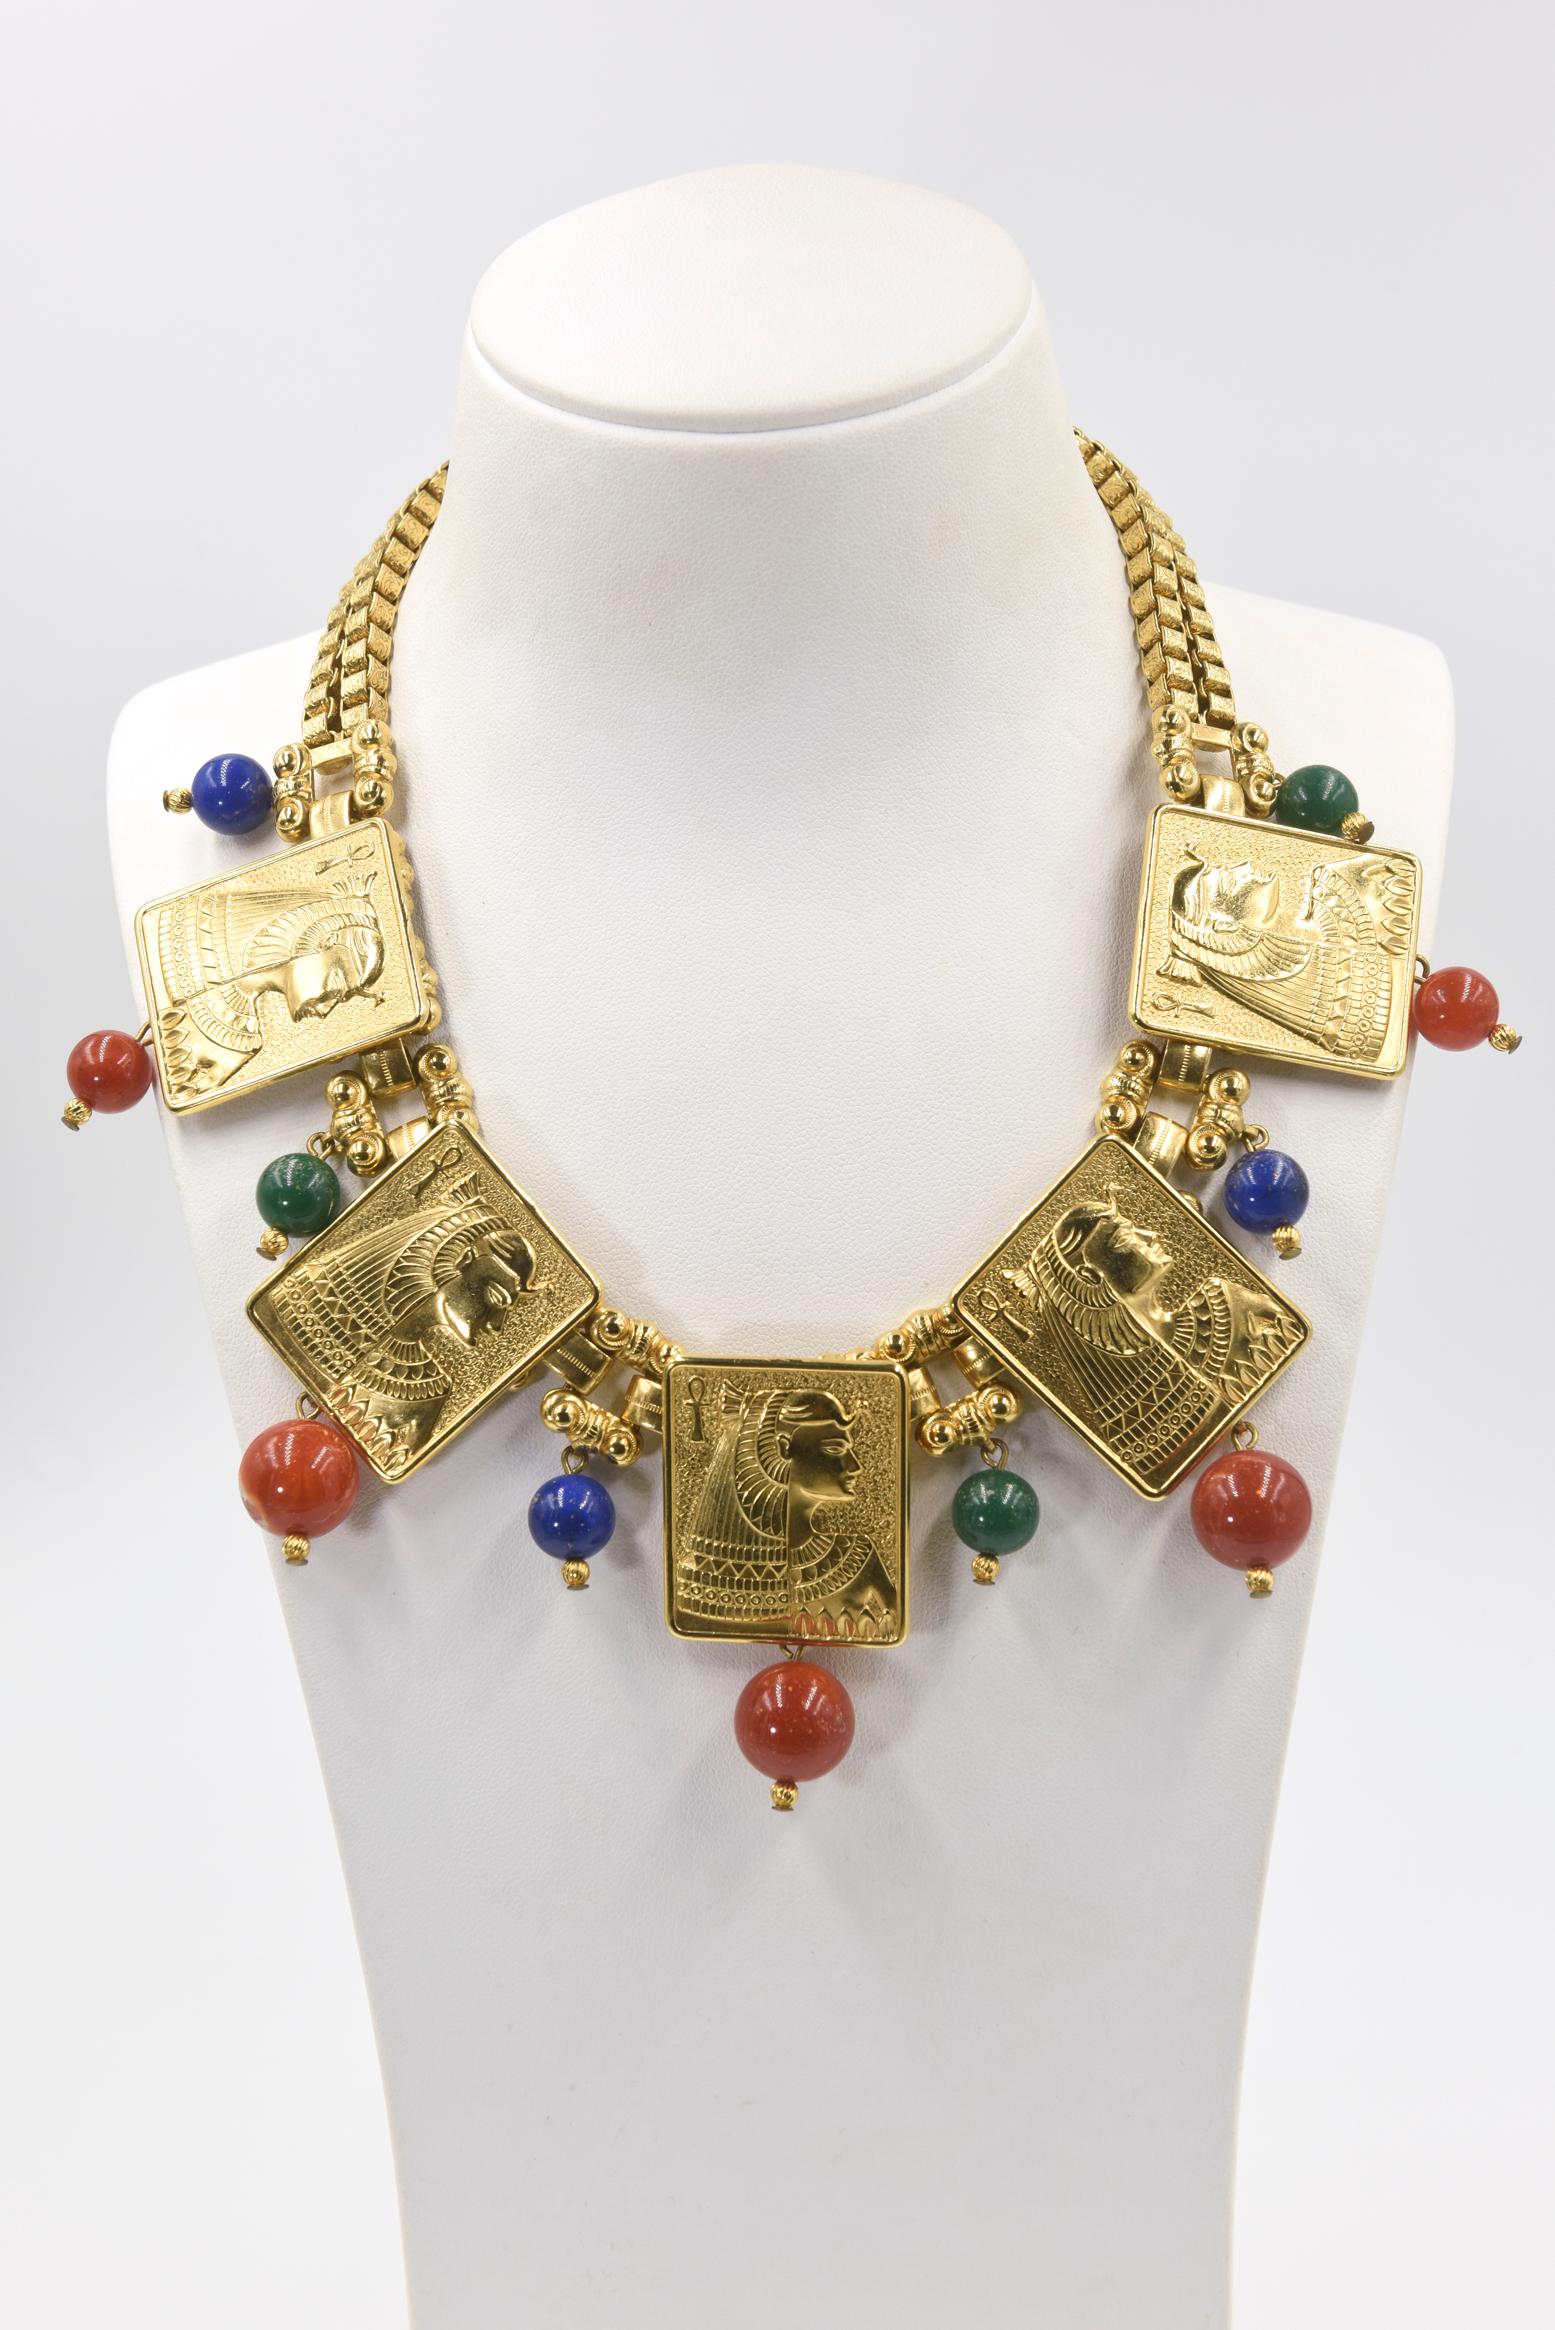 Stunning Egyptian Revival necklace featuring high relief plaques of Cleopatra accented with blue, orange and green beads.  The necklace has 5 plaques with dangling orange sunstone beads.  Between the plaques are double bridges to a rectangular link